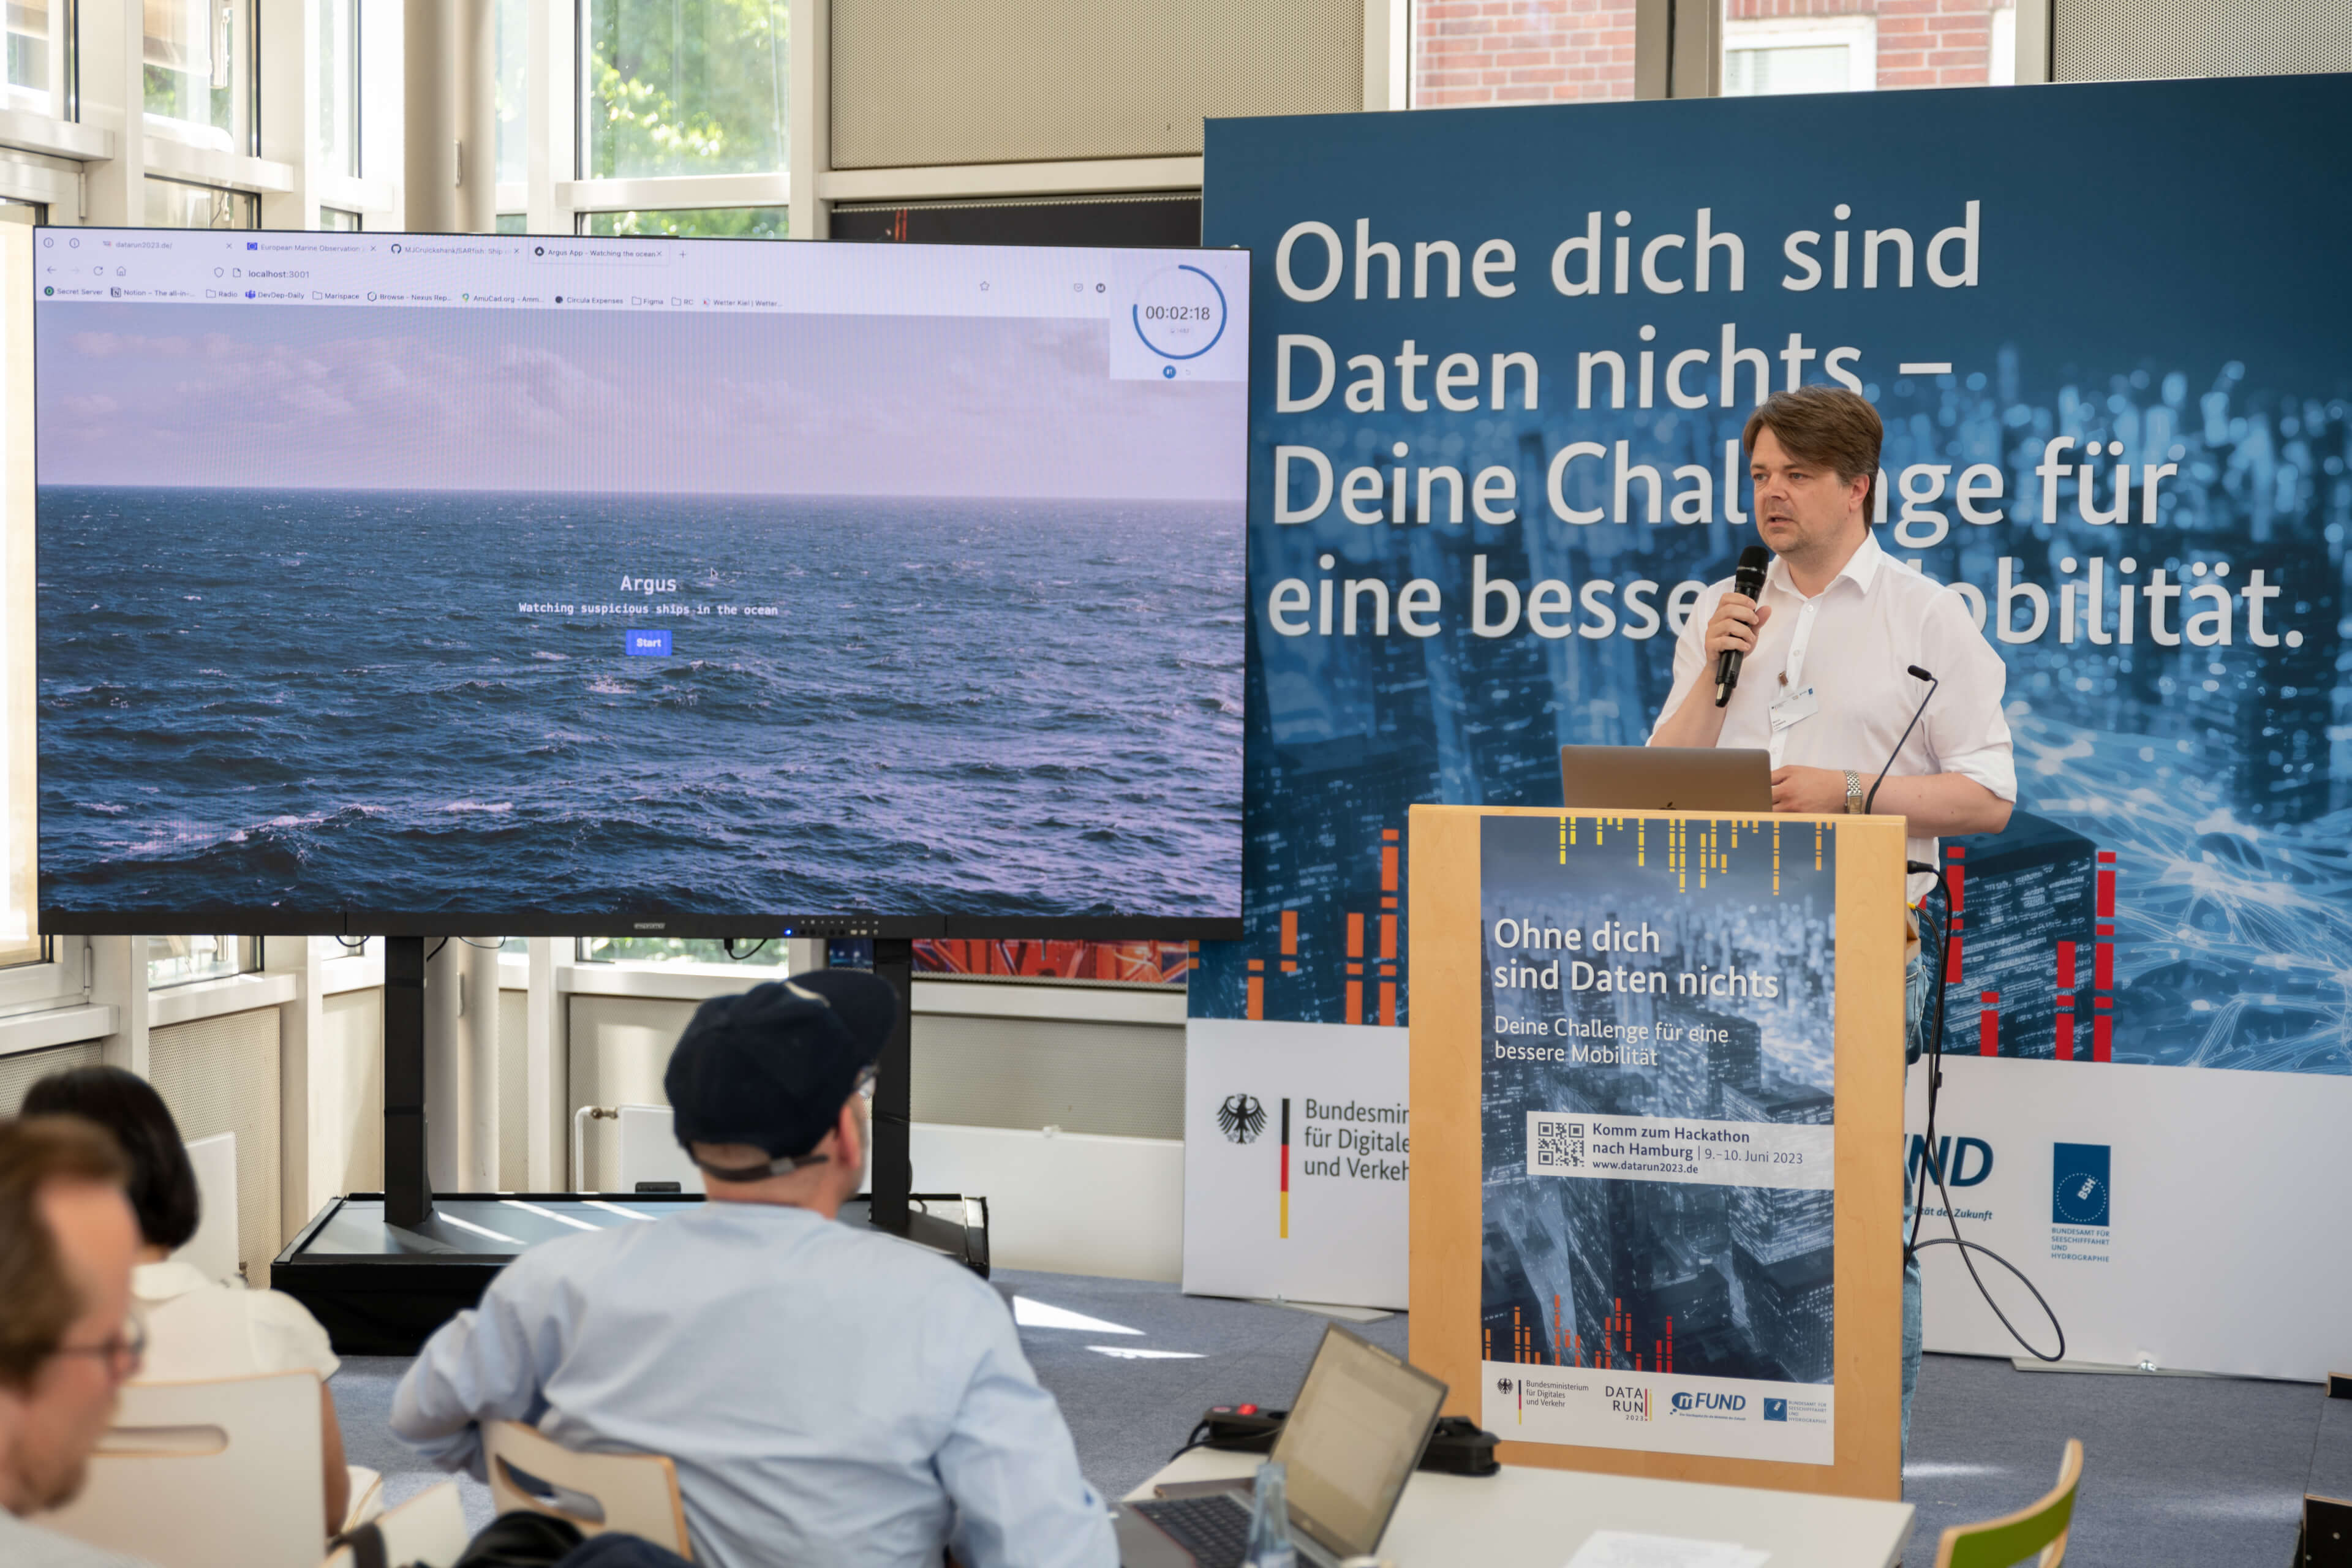 north.io team presents and wins the Hackathon of the Federal Maritime & Hydrographic Agency